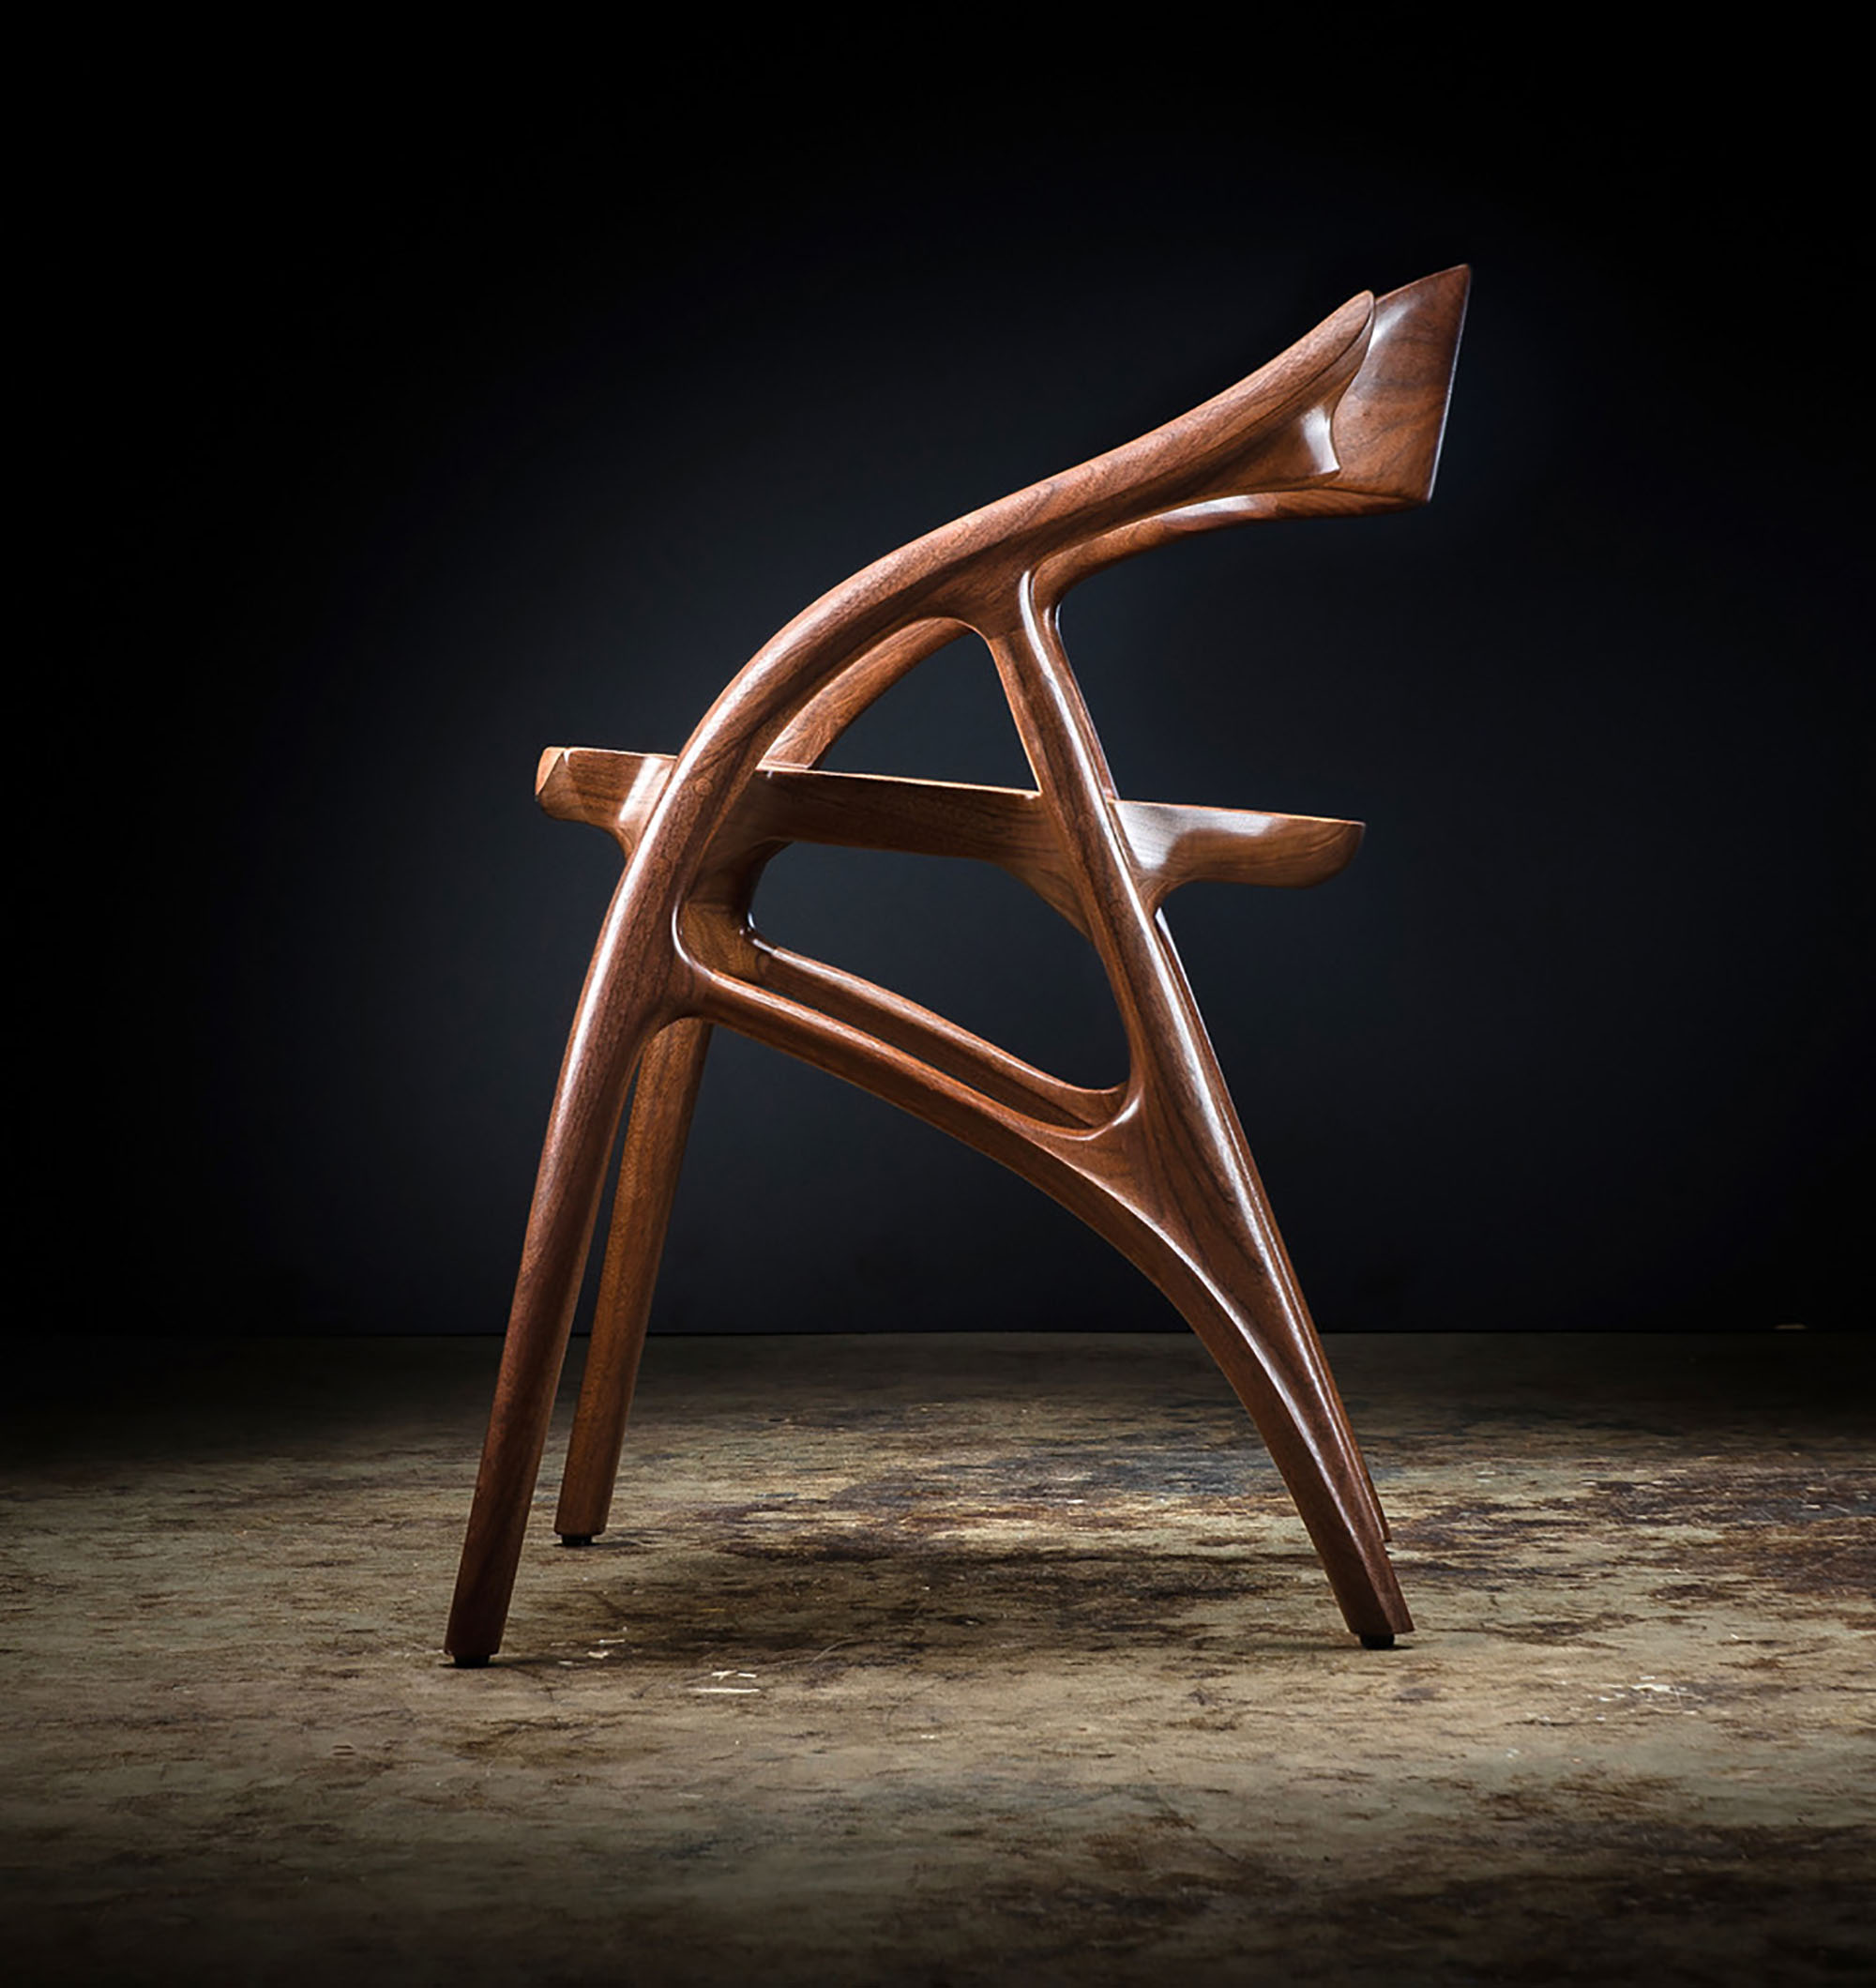 Robert and Tor Erickson. Wapiti Chair (2020). Maple version. Dimensions: 28.5” h x 22.5” w x 22” d. ©Erickson Woodworking 2020. Courtesy of the artists.